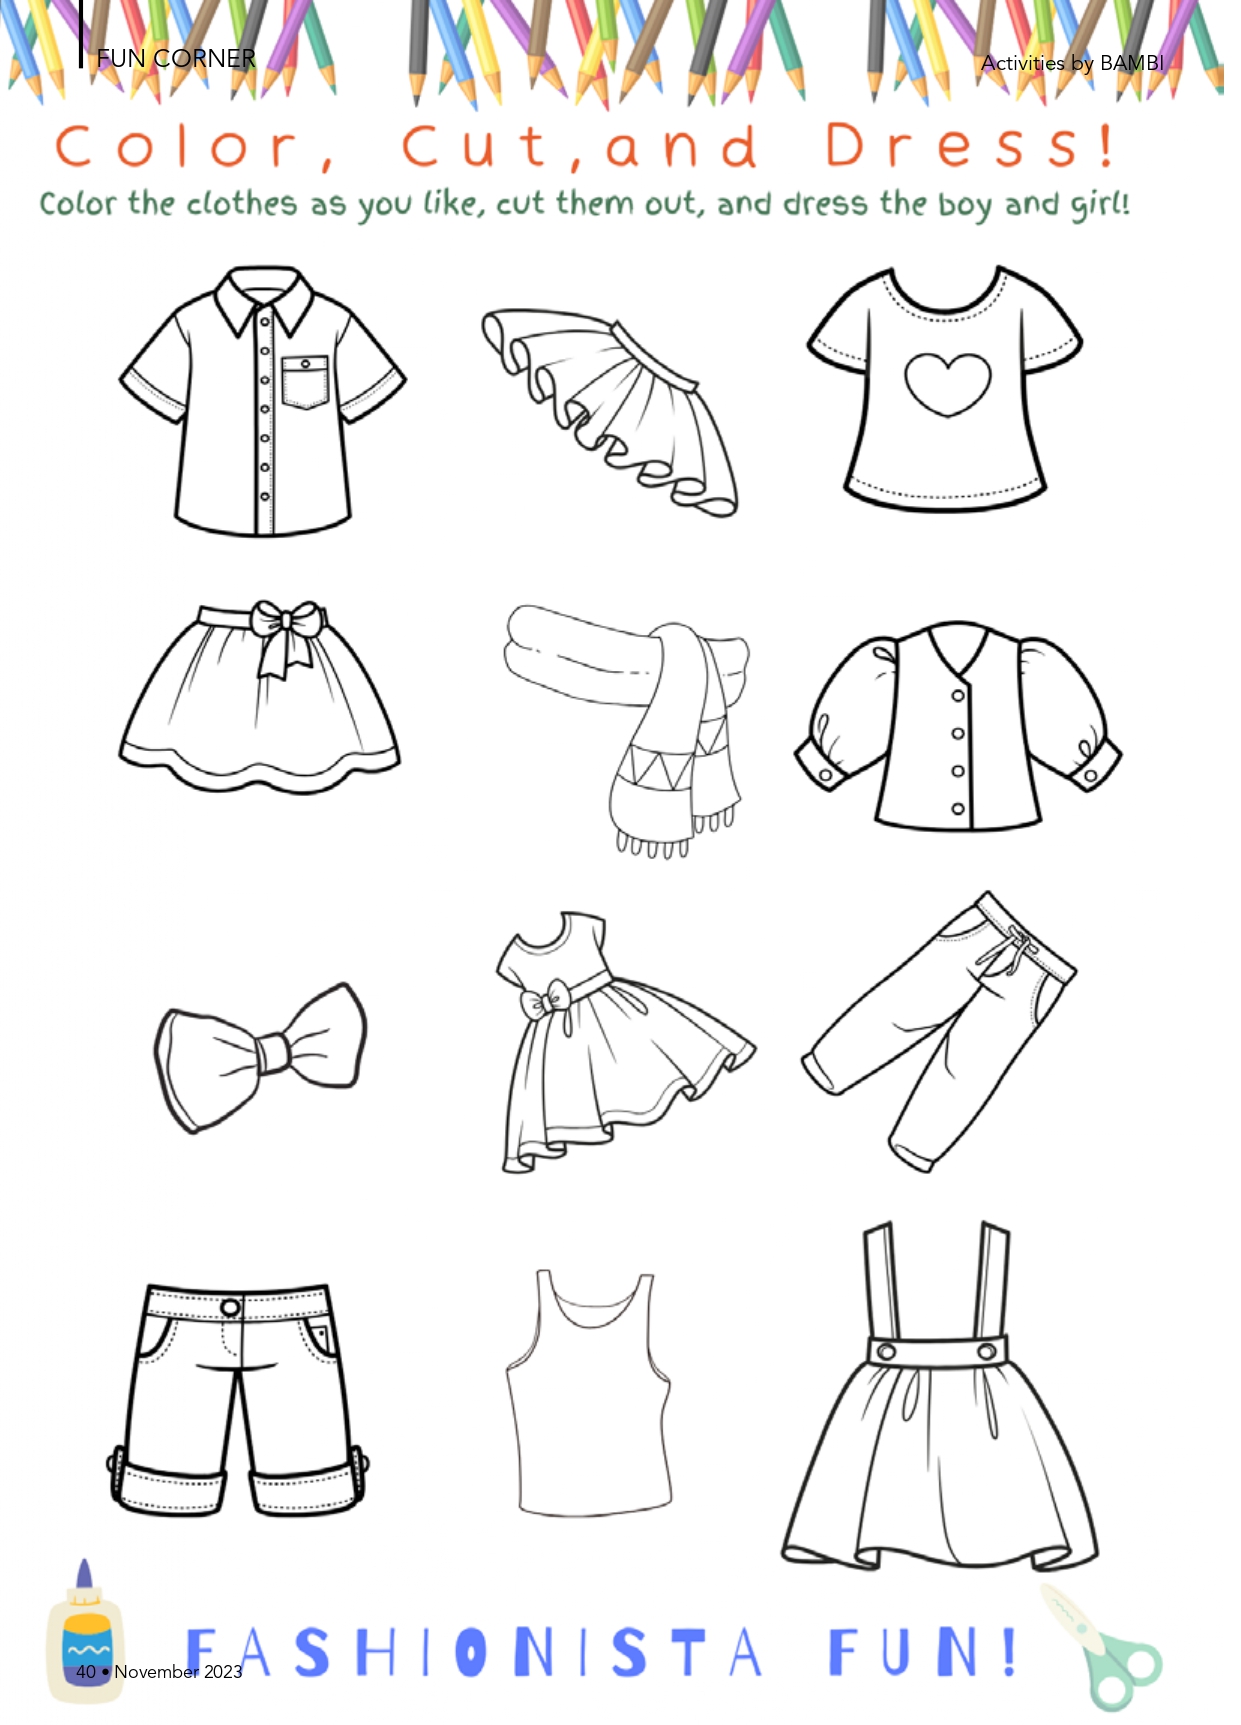 Worksheet with different kinds of clothes